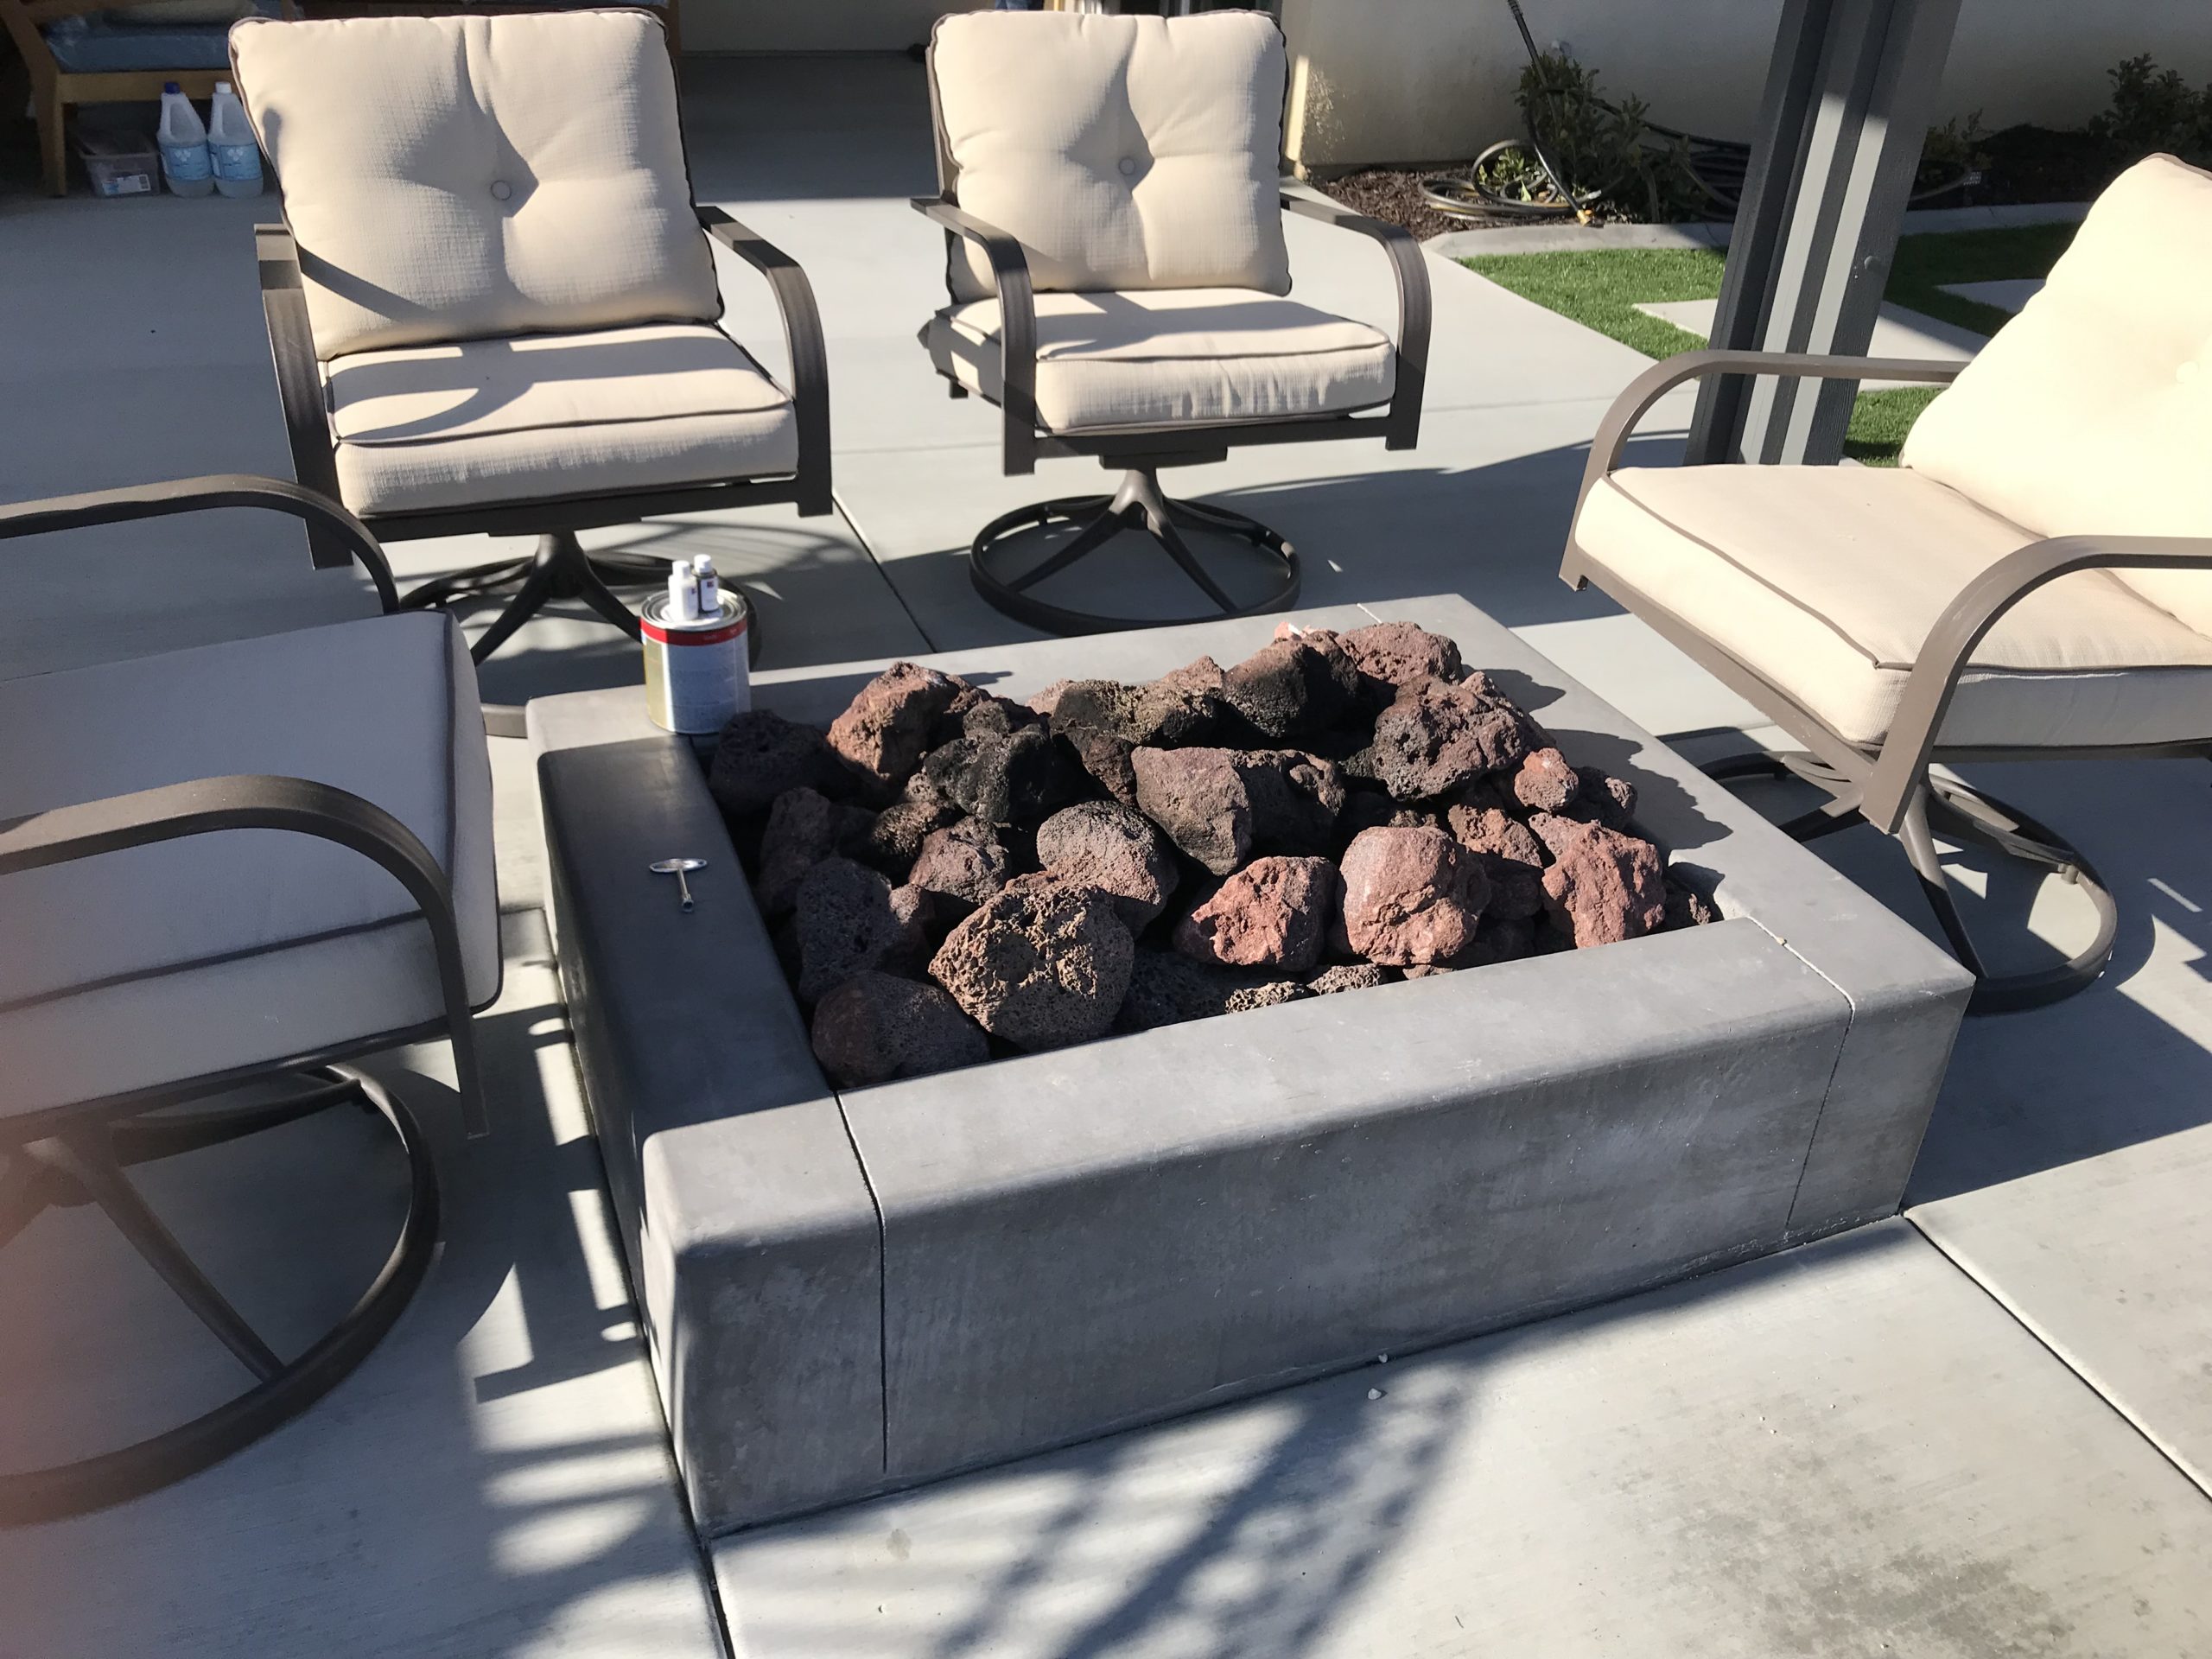 Custom fire pit surrounded by patio chairs.